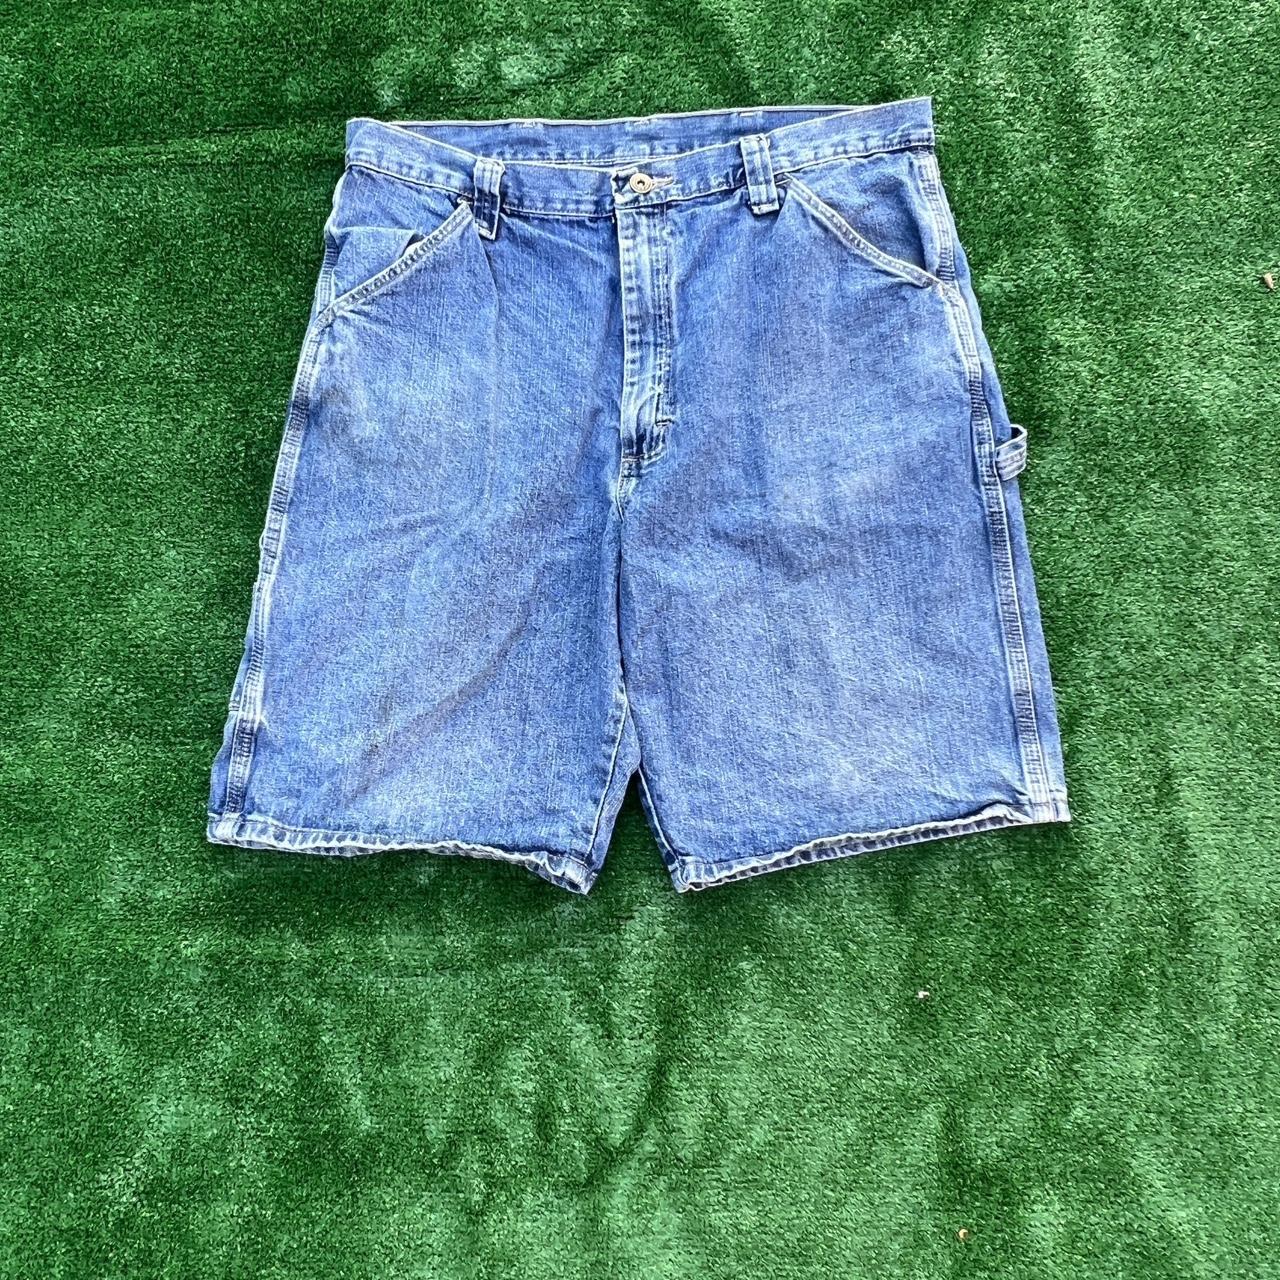 WRANGLER JEAN SHORTS - AMAZING QUALITY - TAGGED A... - Depop